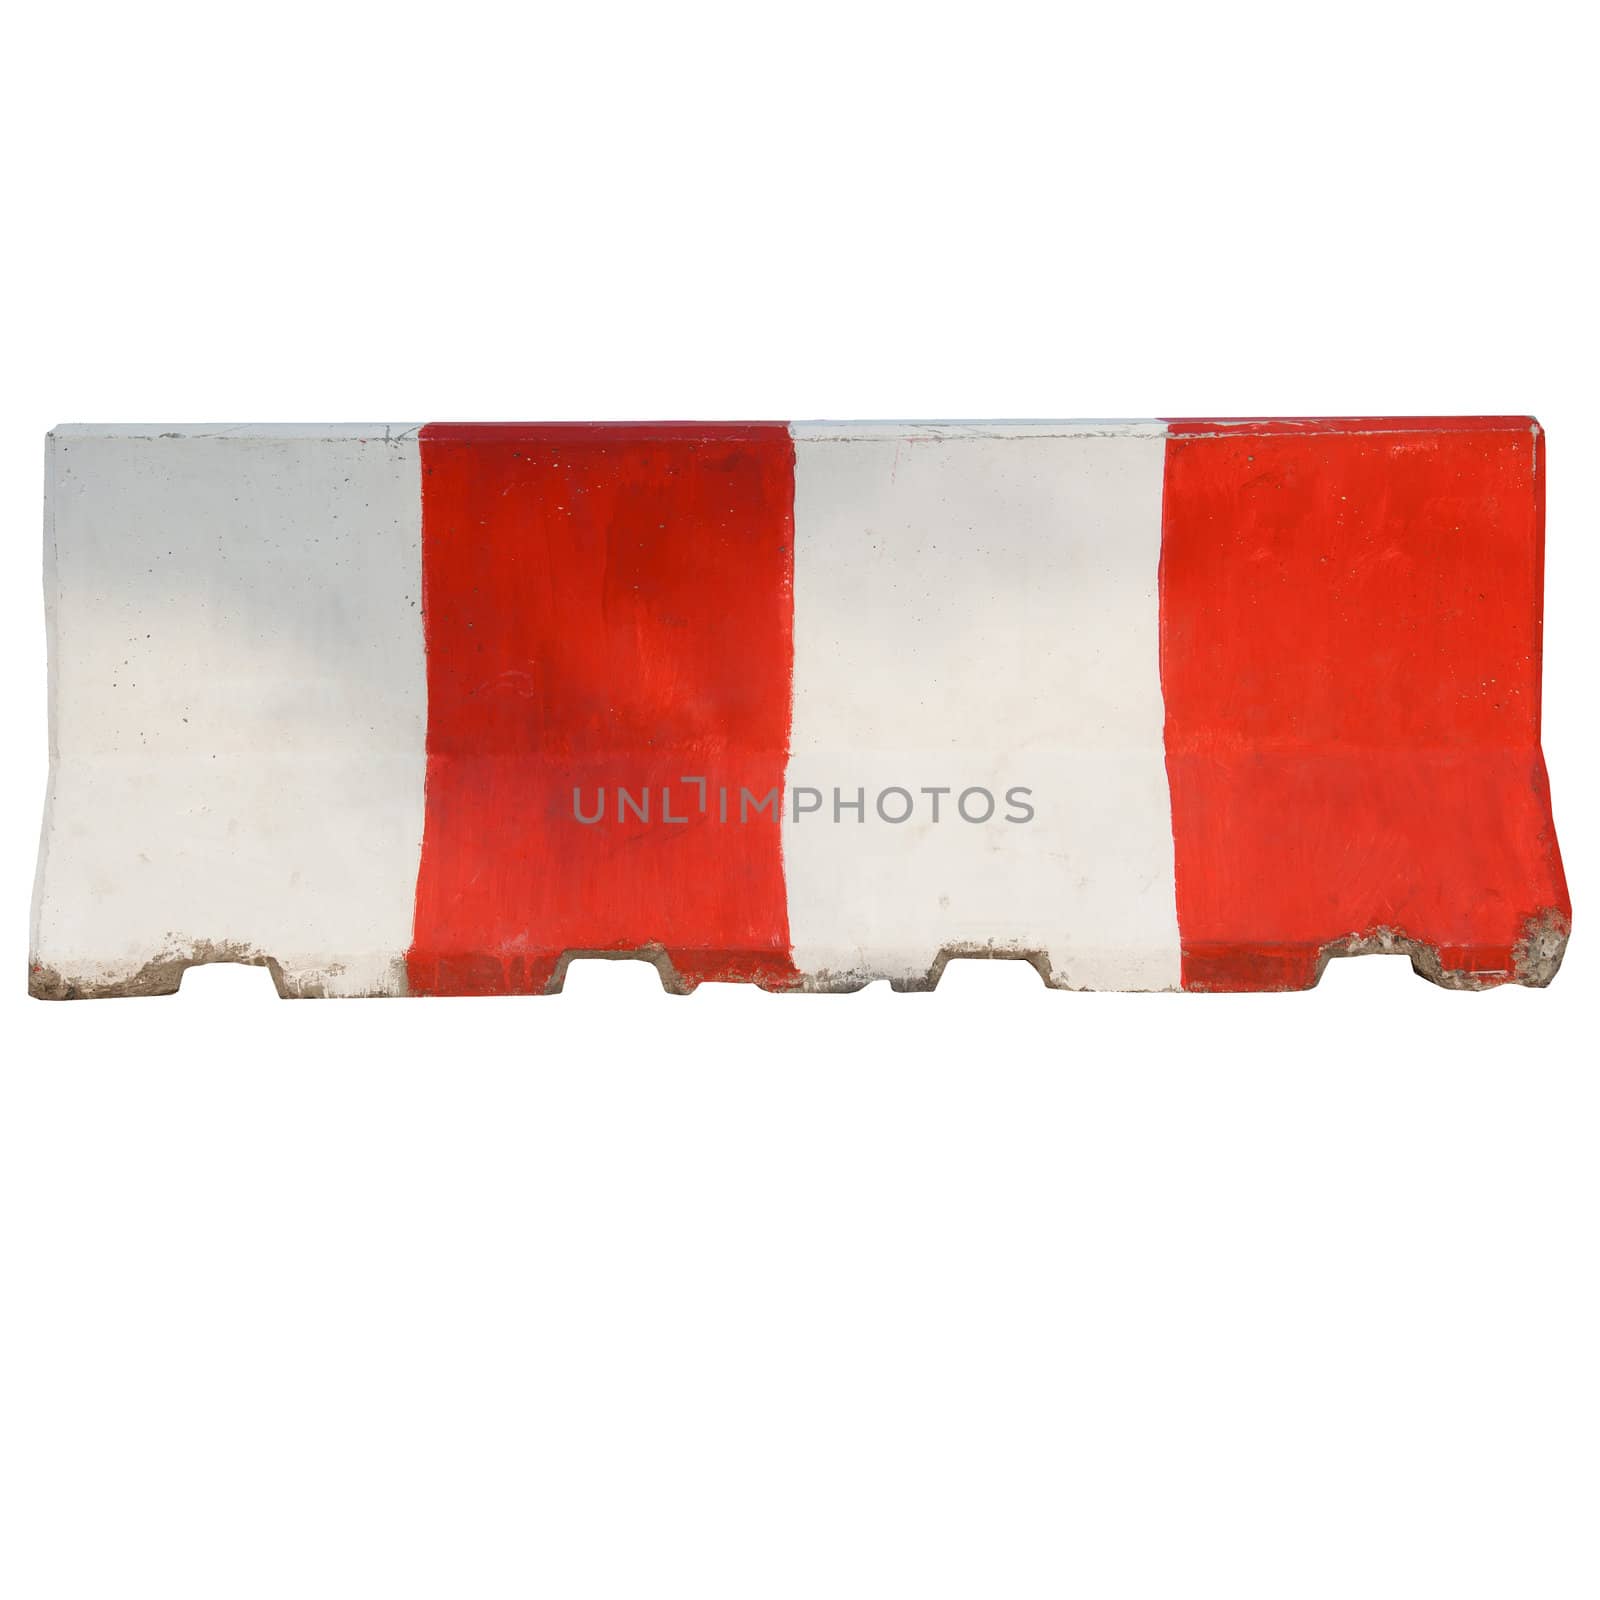 The red and white concrete barriers by rainyrf